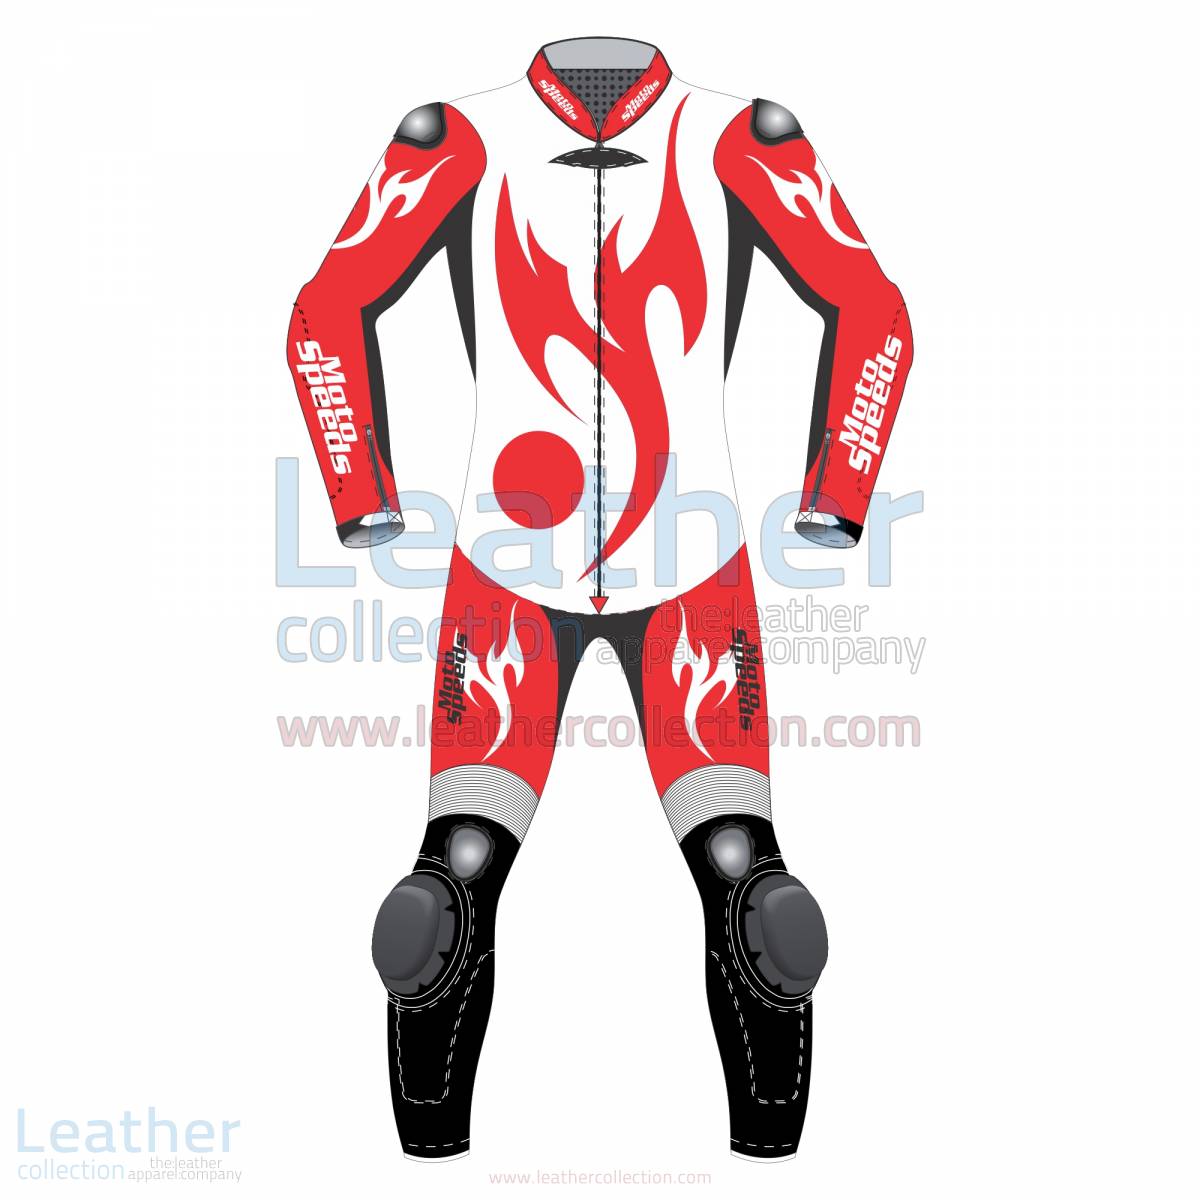 Motorcylce Red Eagle Logo - Order Red Eagle Motorcycle Racing Leathers for $725.00